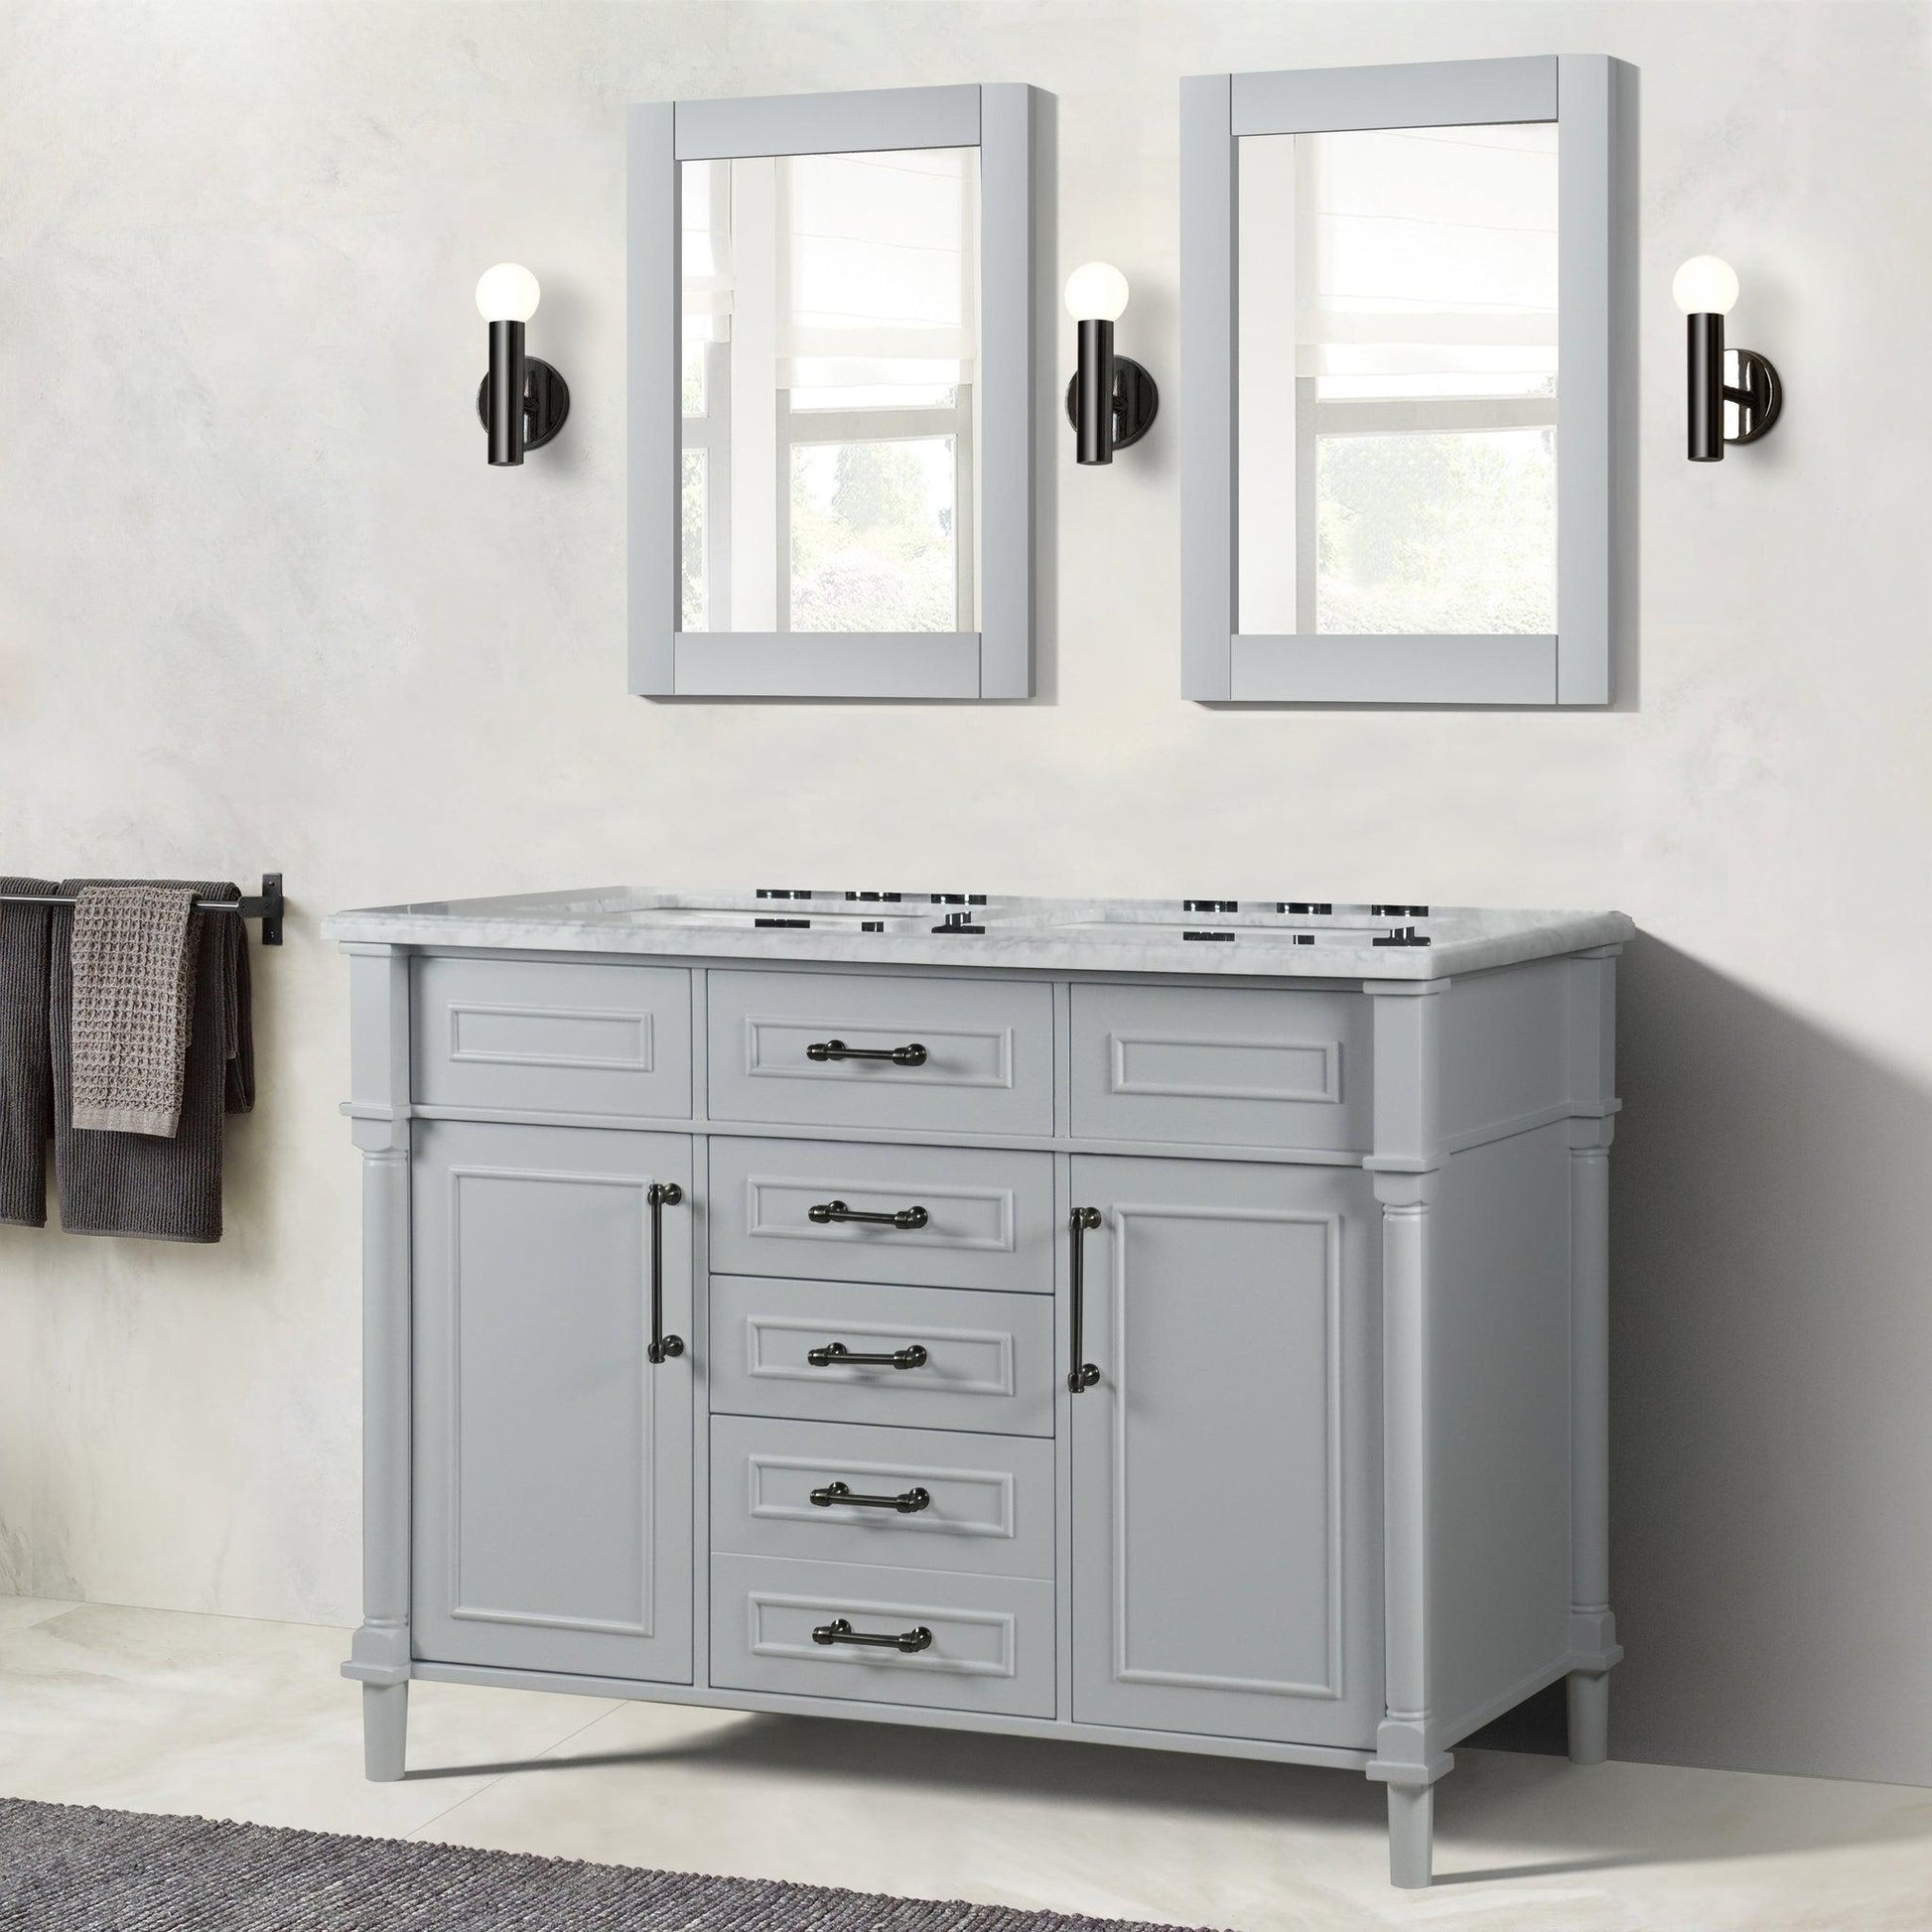 Bellaterra Home Napa 48" 2-Door 4-Drawer Gray Freestanding Vanity Set With Ceramic Double Undermount Rectangular Sink and White Carrara Marble Top, and Black Hardware